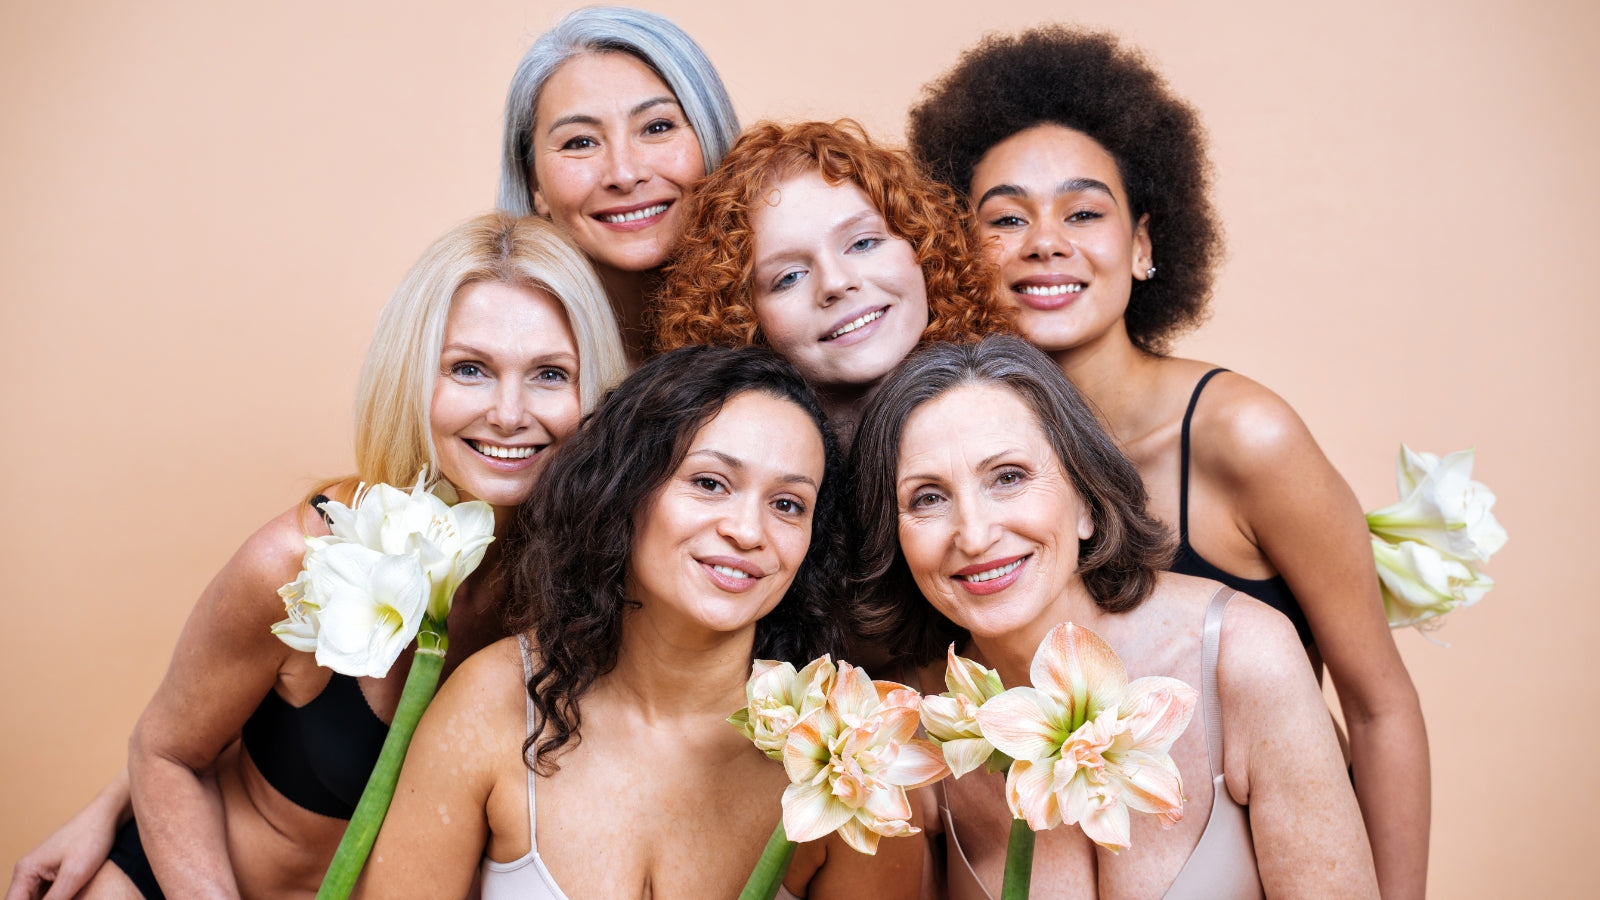 Women of different backgrounds embracing natural beauty